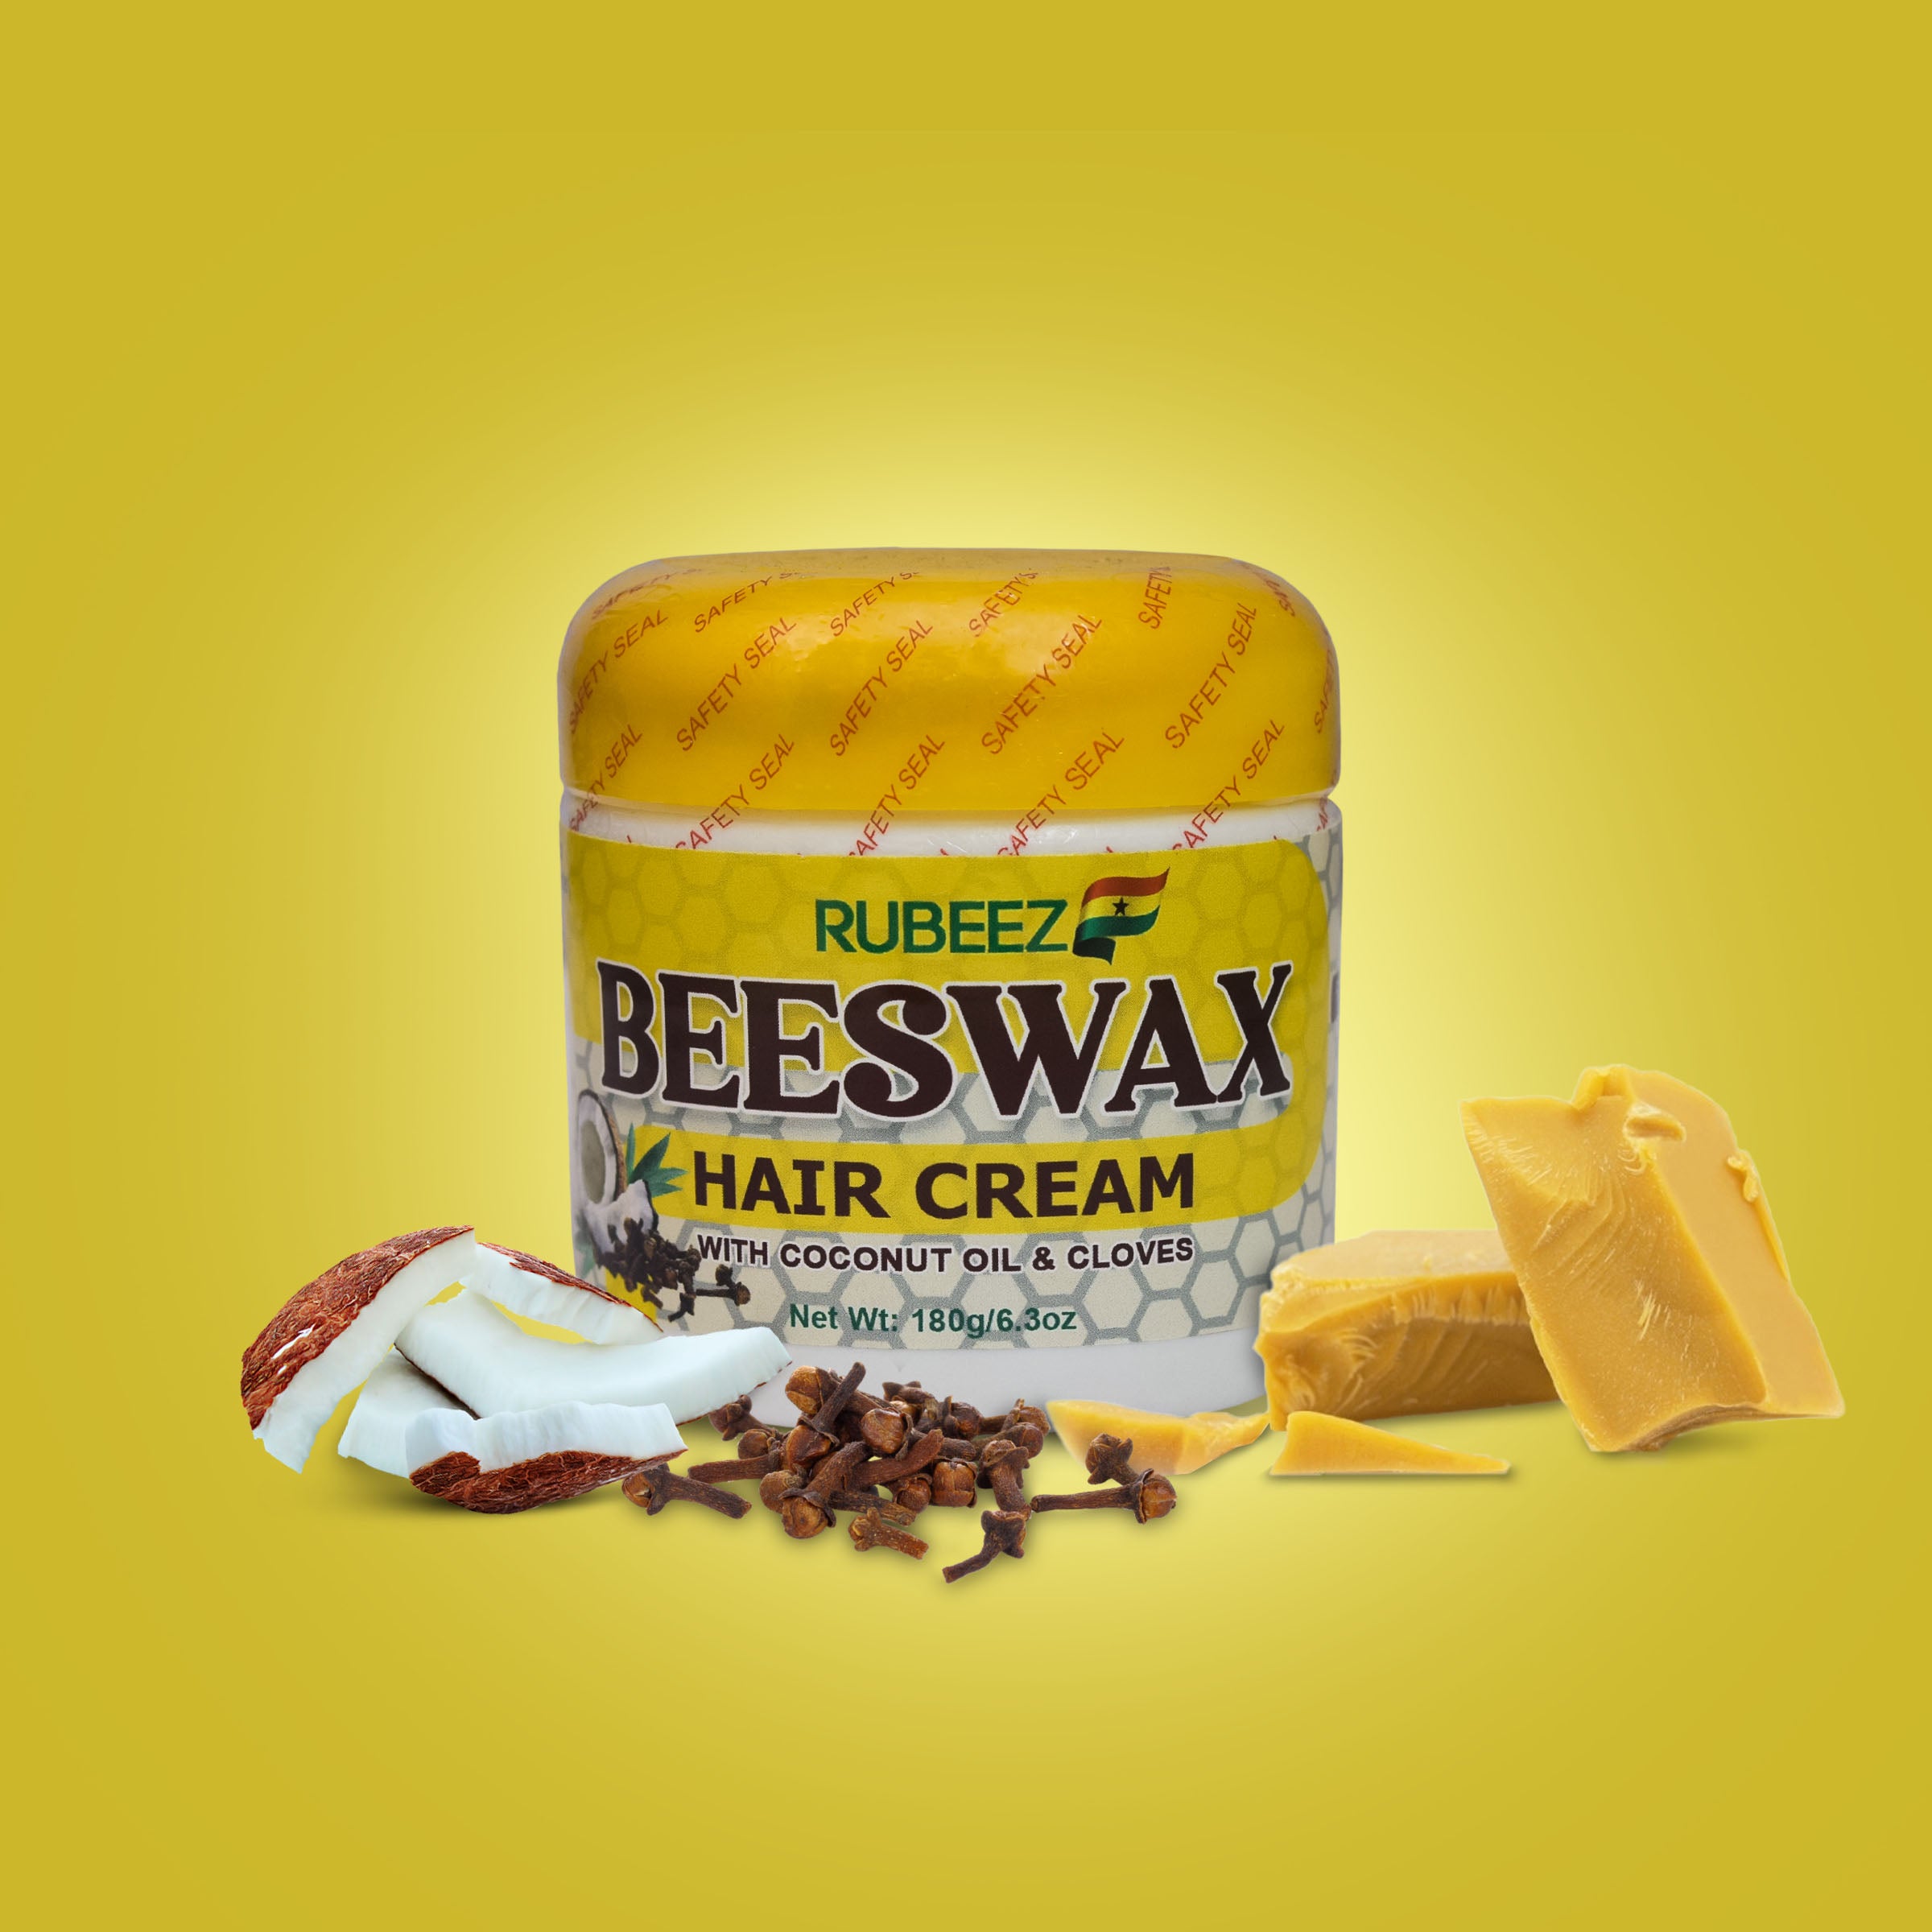 Beeswax Hair Cream Coconut Oil And Cloves – Rubeez Beeswax